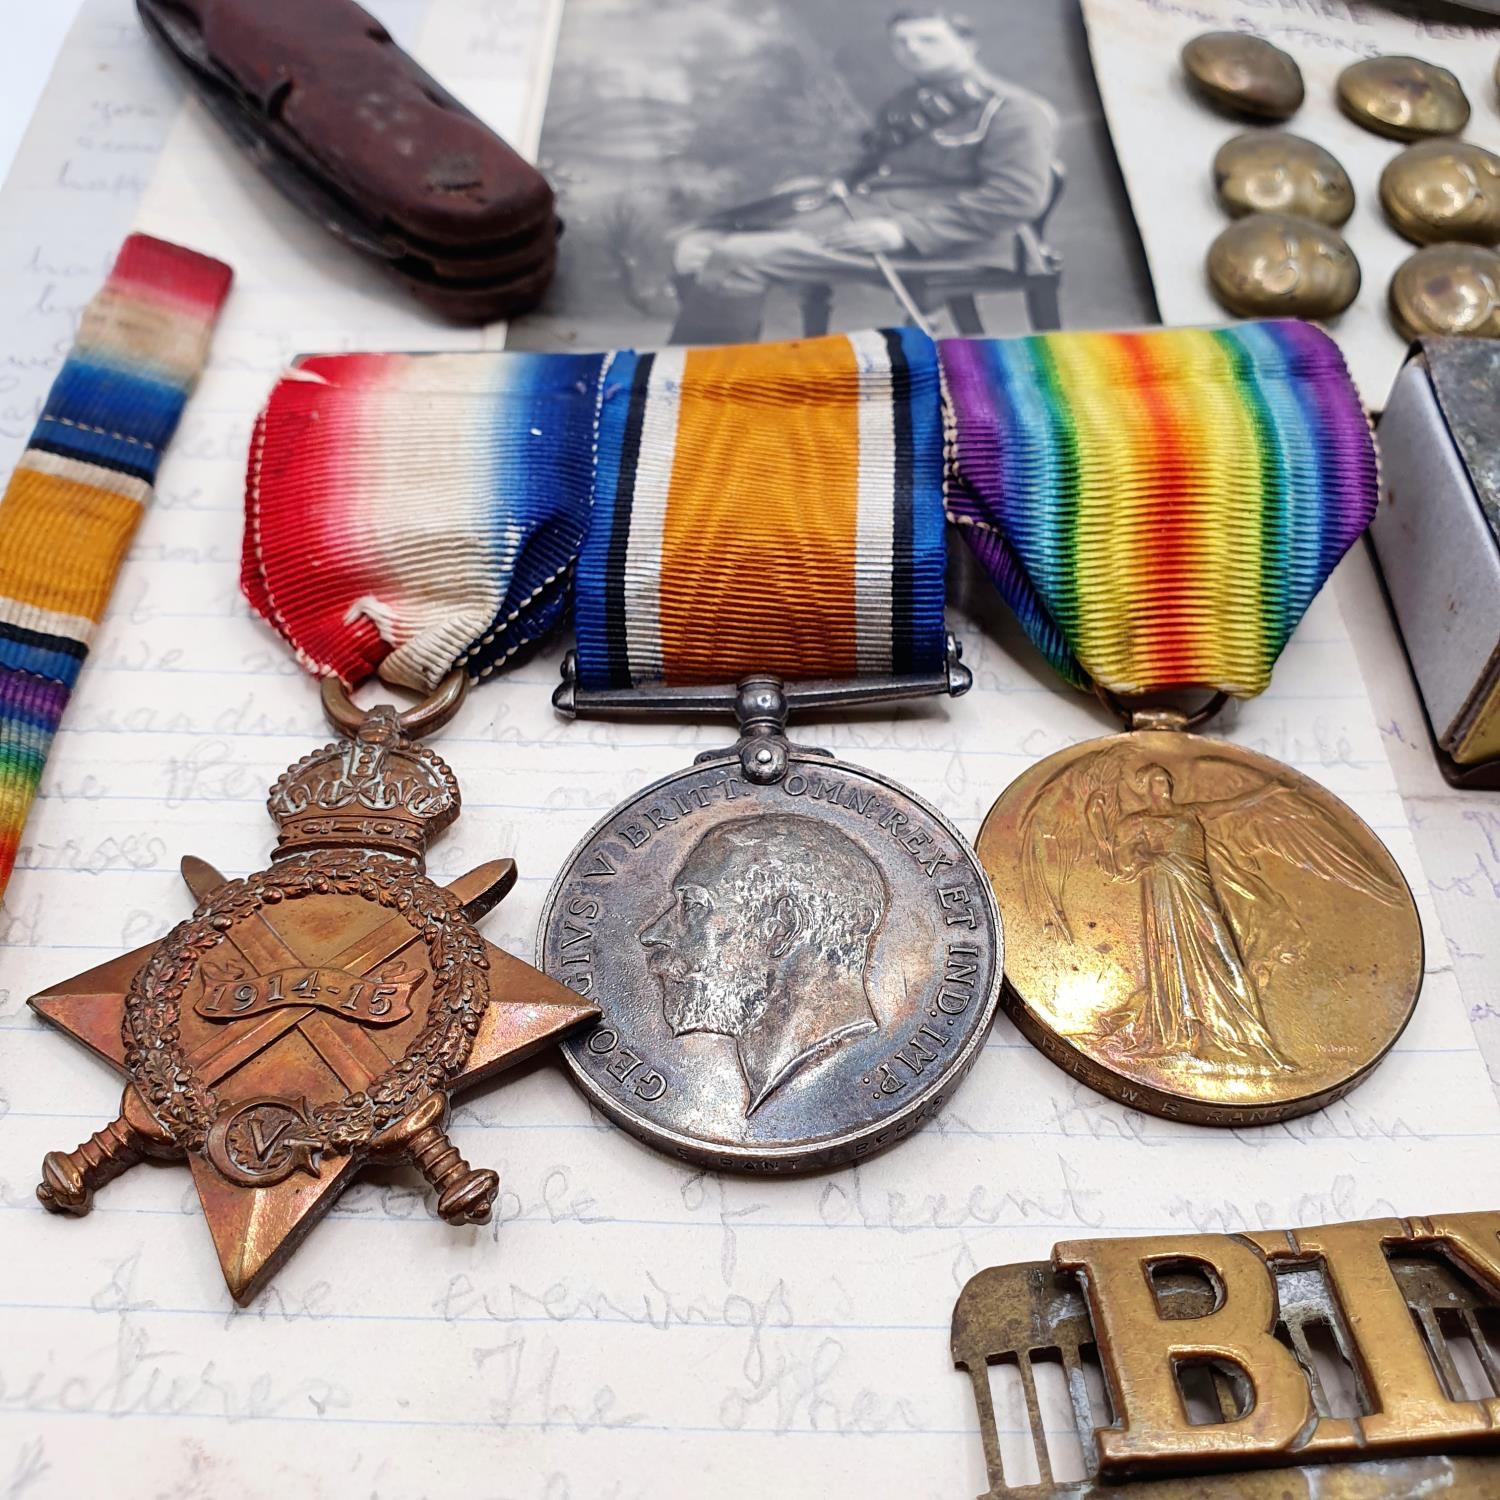 A 1914-15 Star trio, awarded to 2096 Pte W E Rant Berkshire Yeomanry, with his plated spoon,